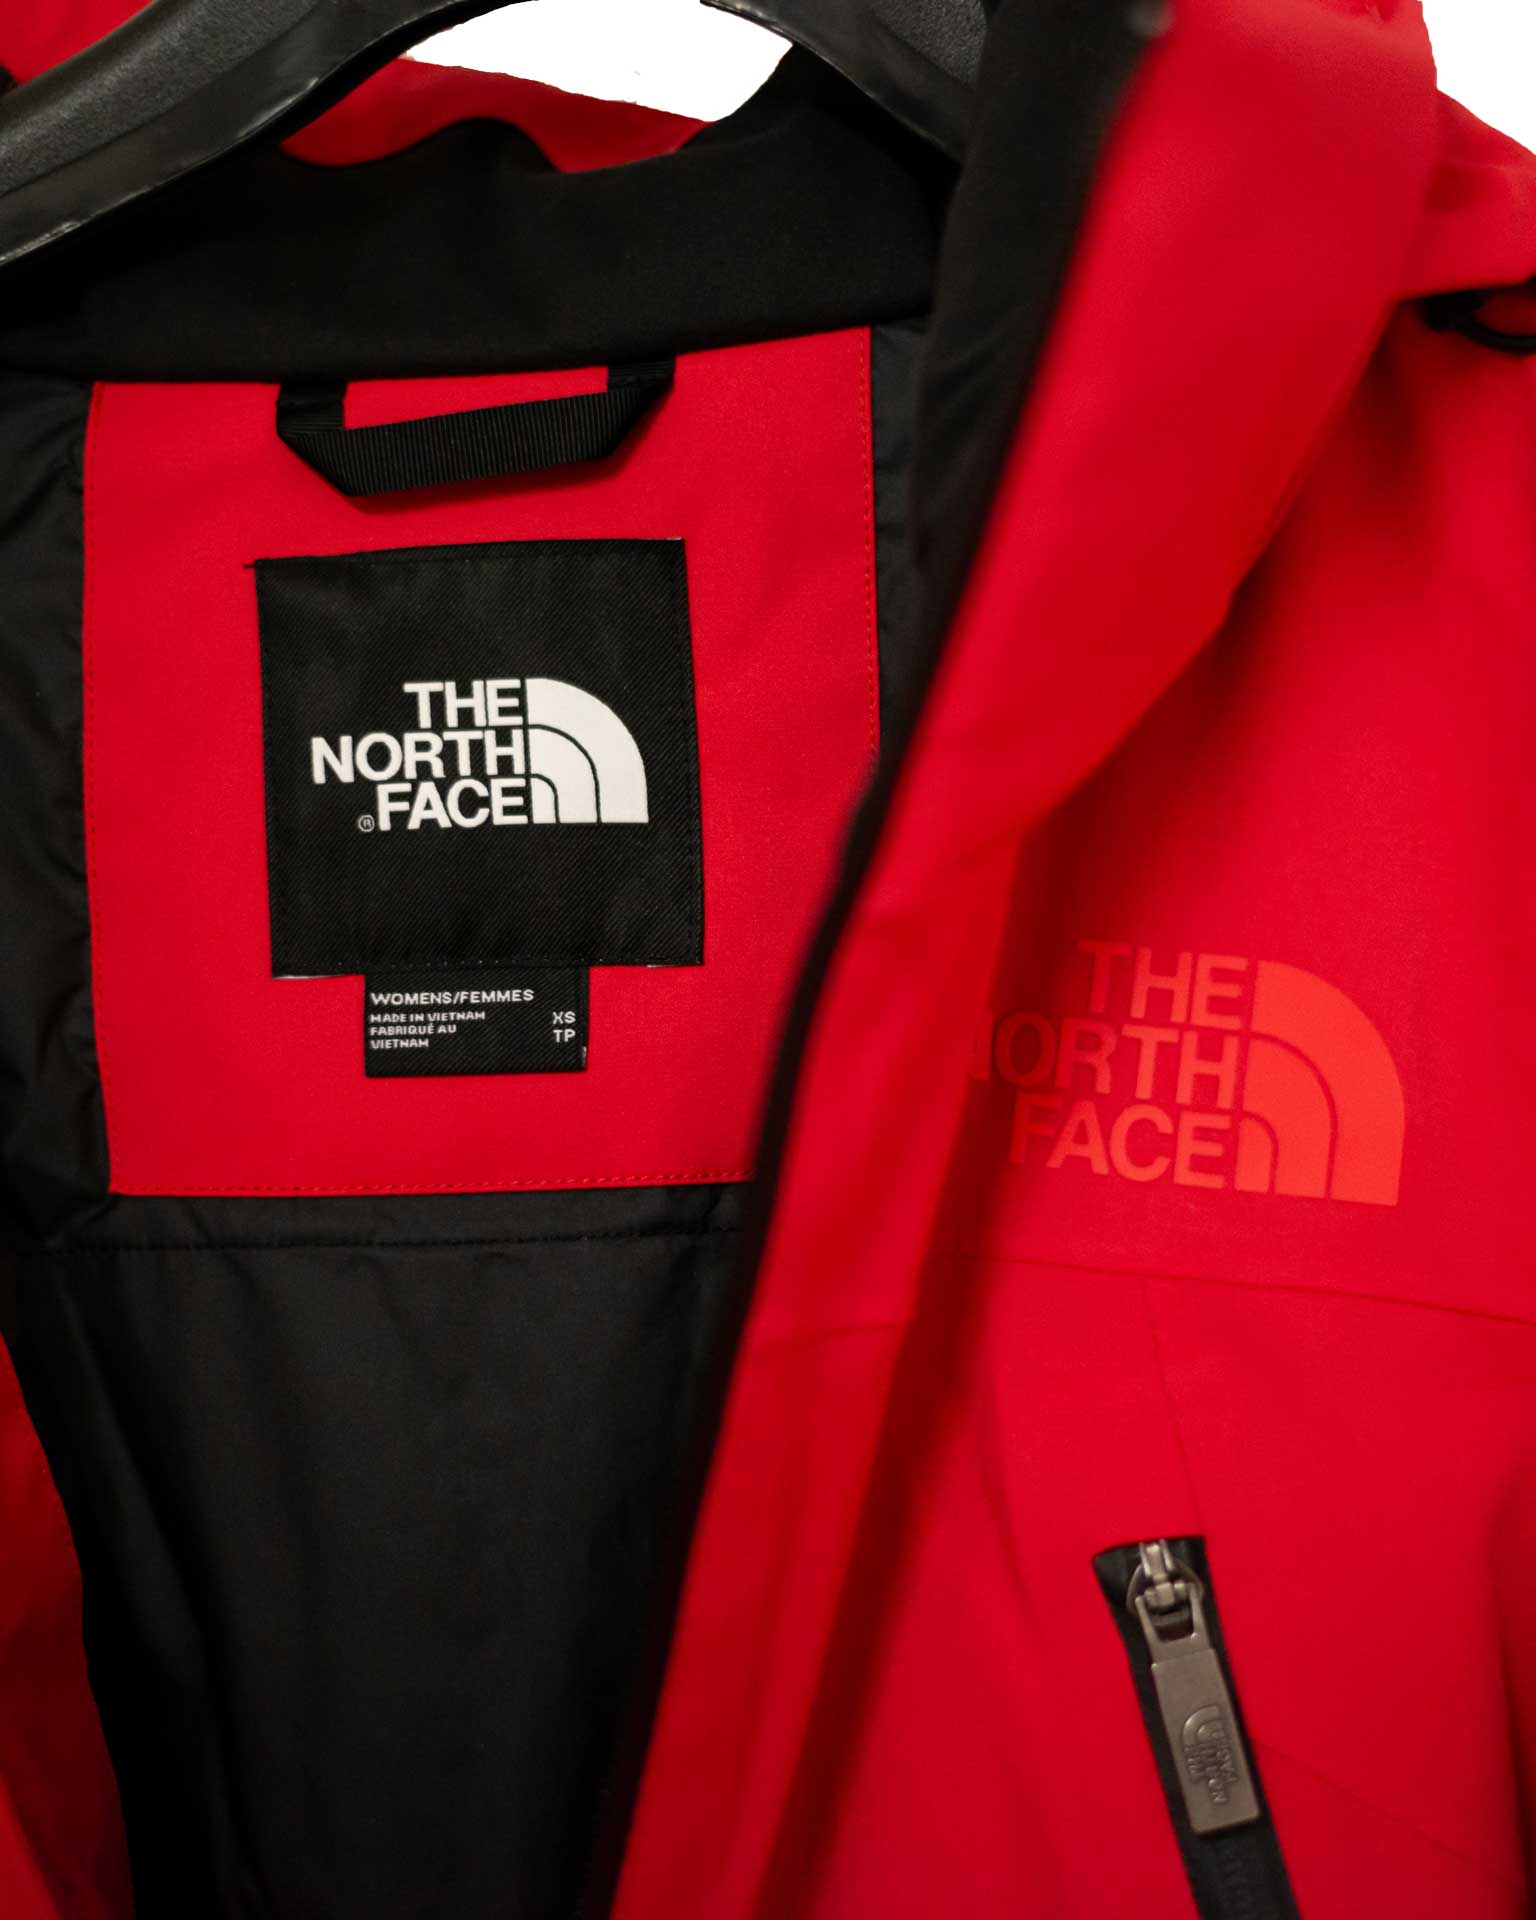 The North Face Lightweight hooded jacket in red